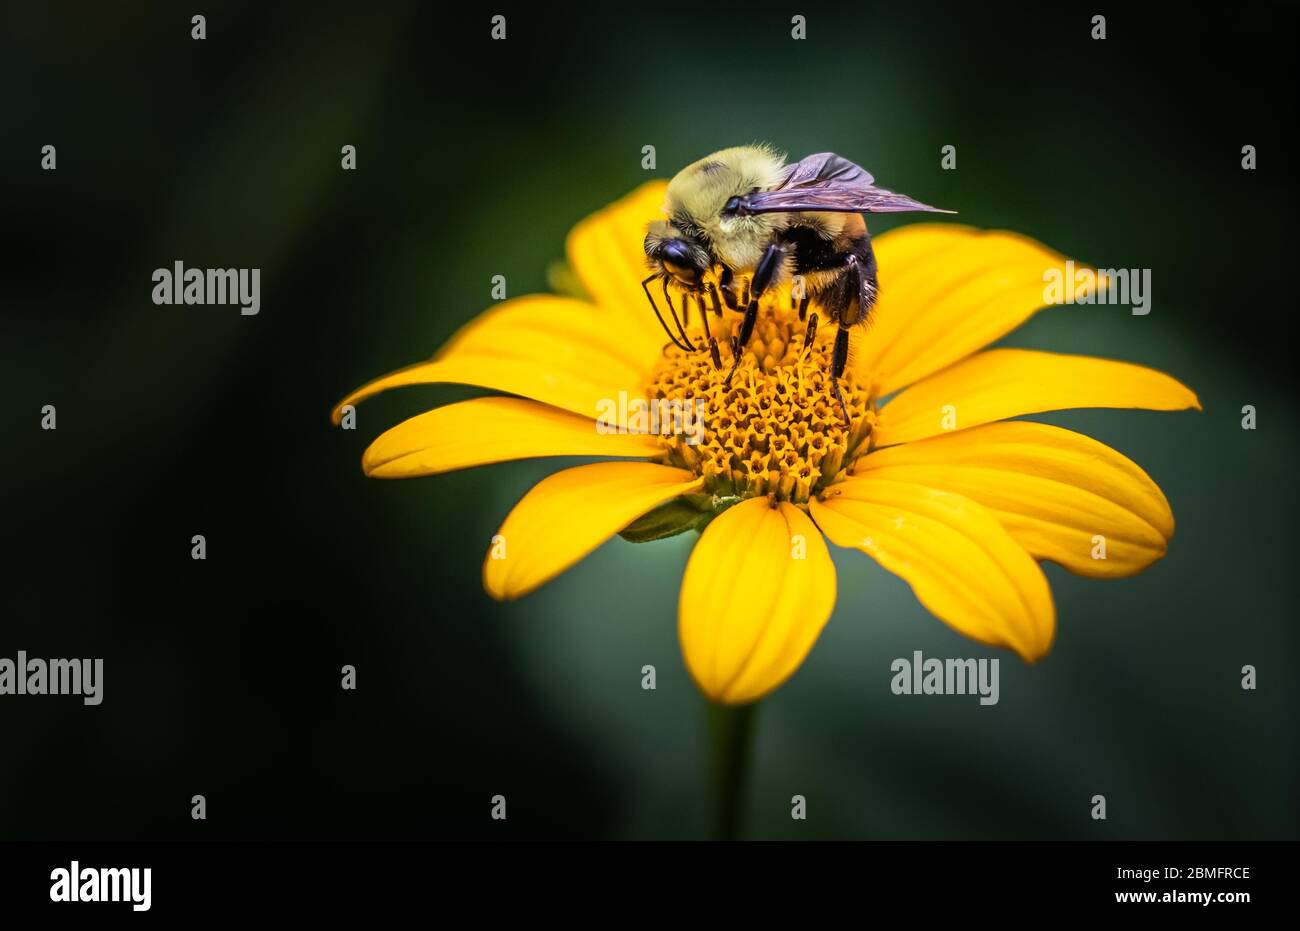 A bumble bee arched over and intensely feeding on a bright yellow flower Stock Photo